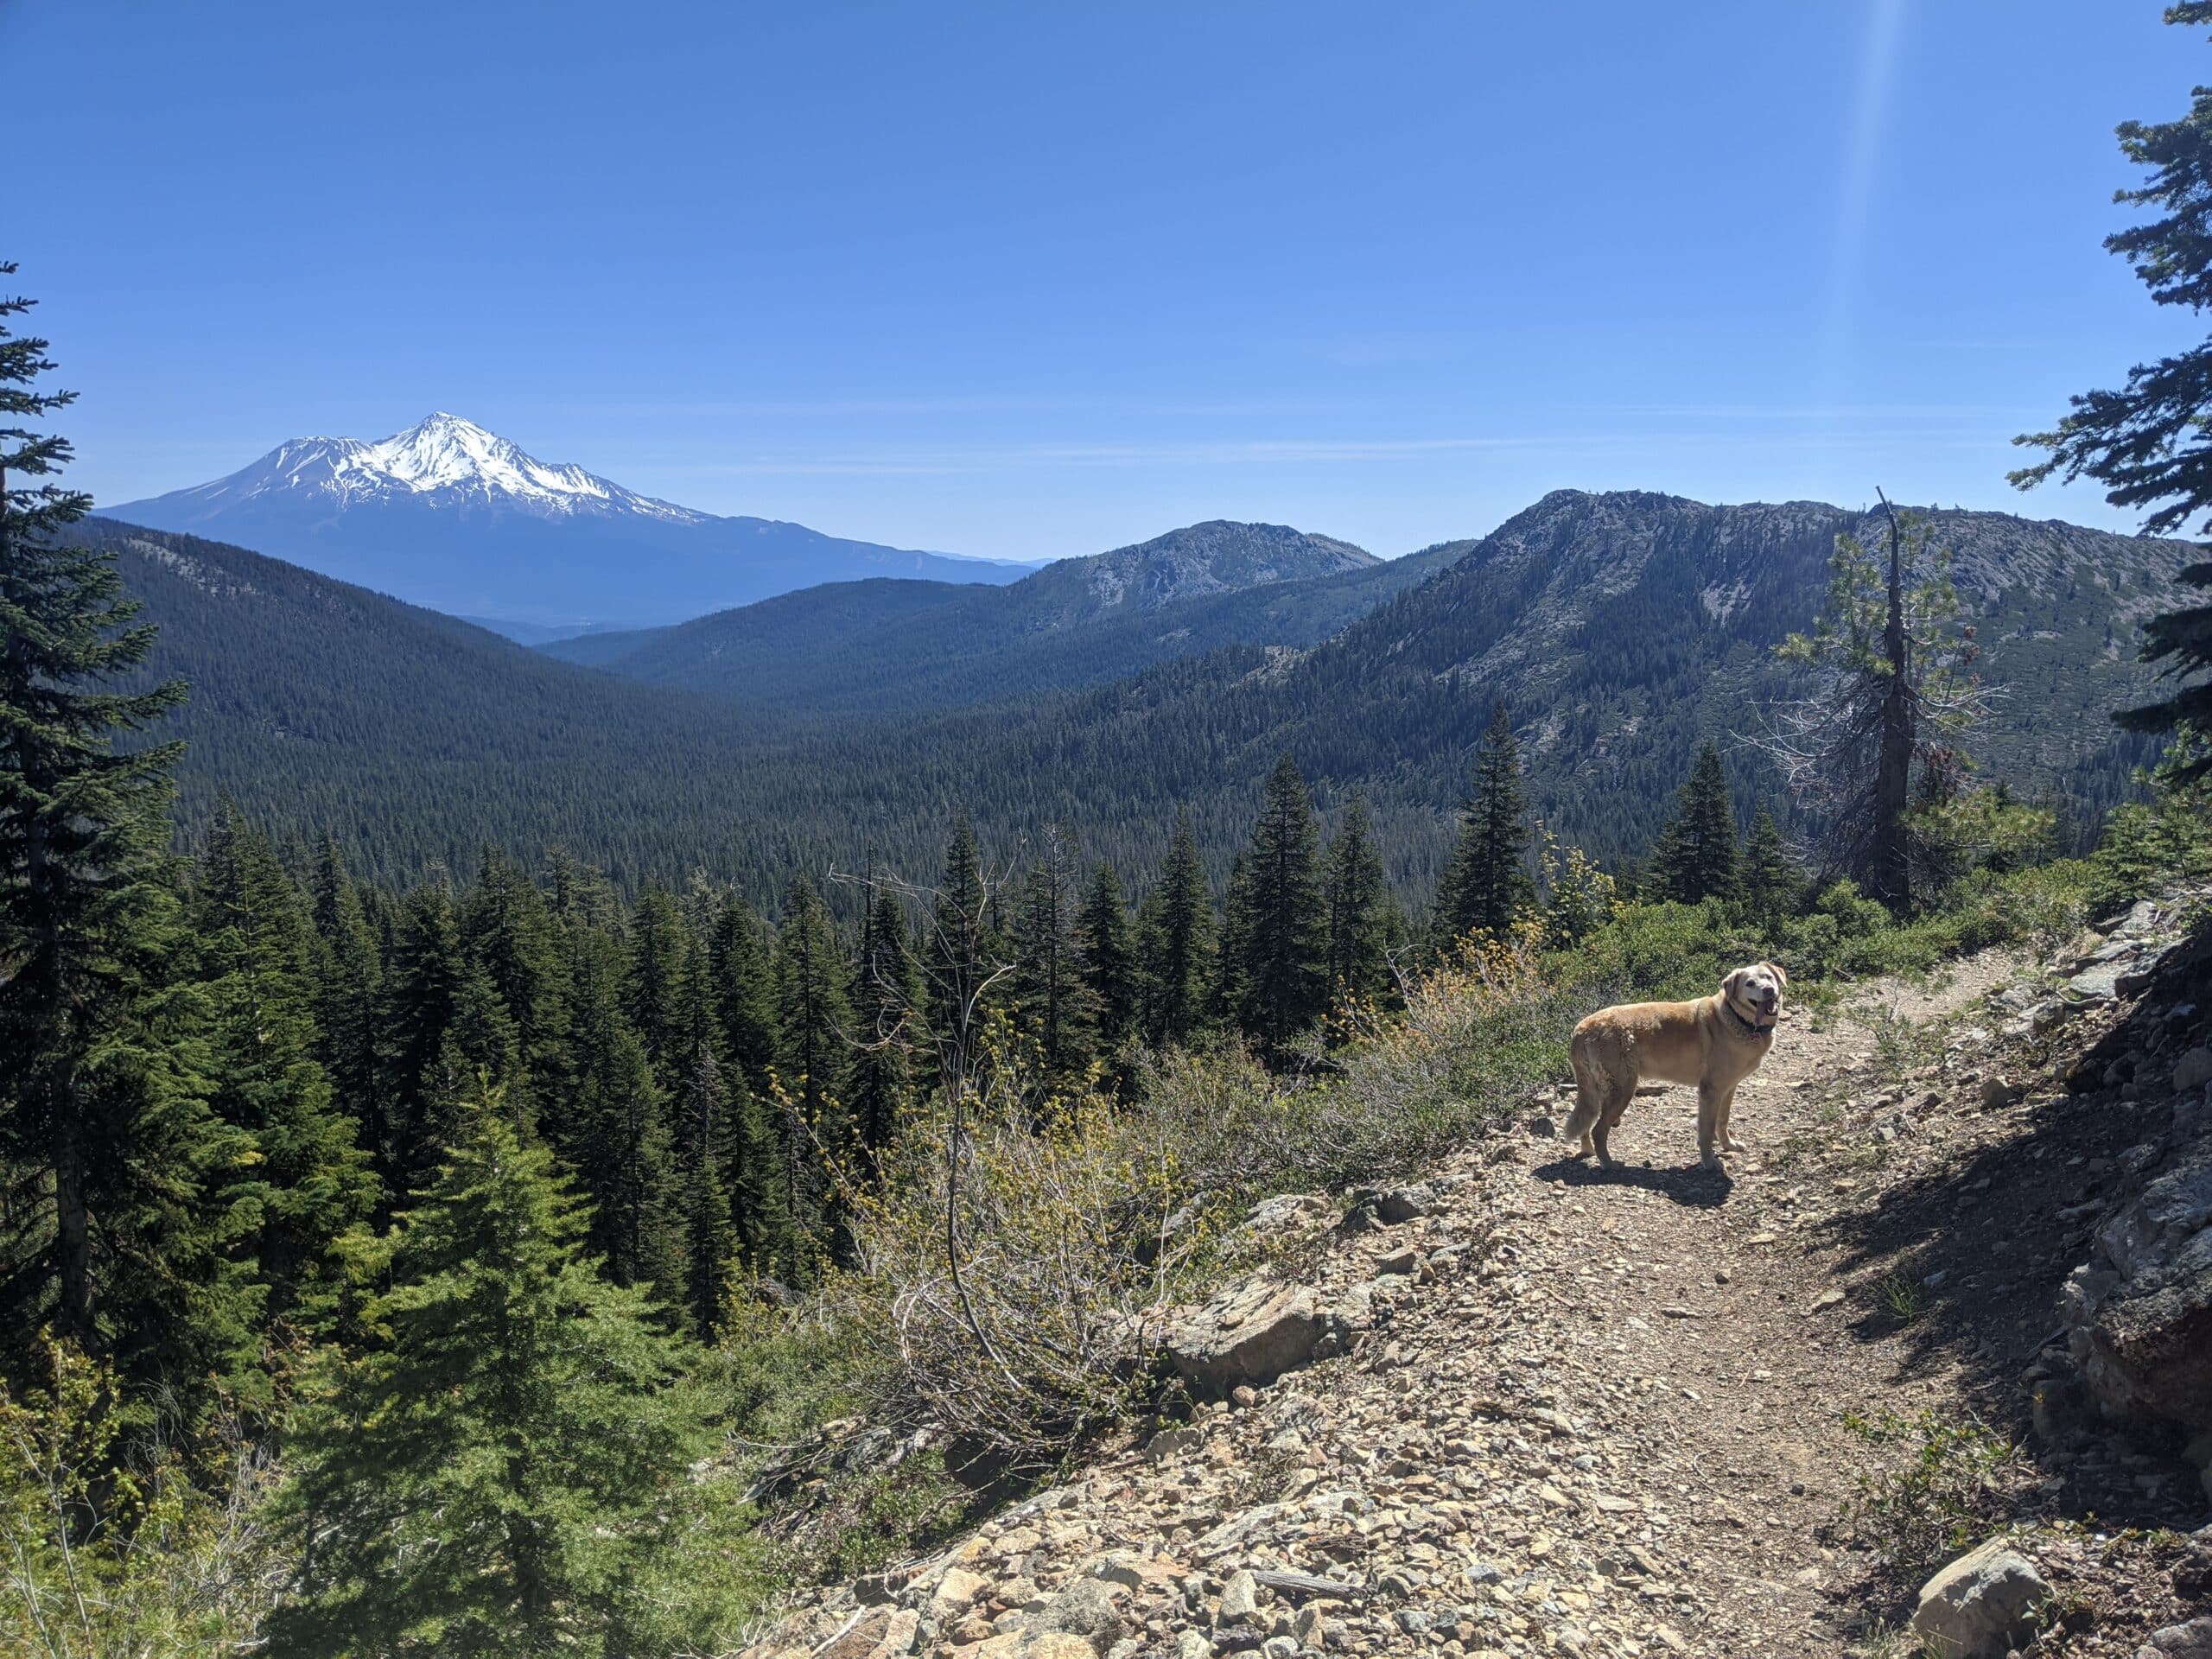 Mount Shasta view from the Pacific Crest Trail